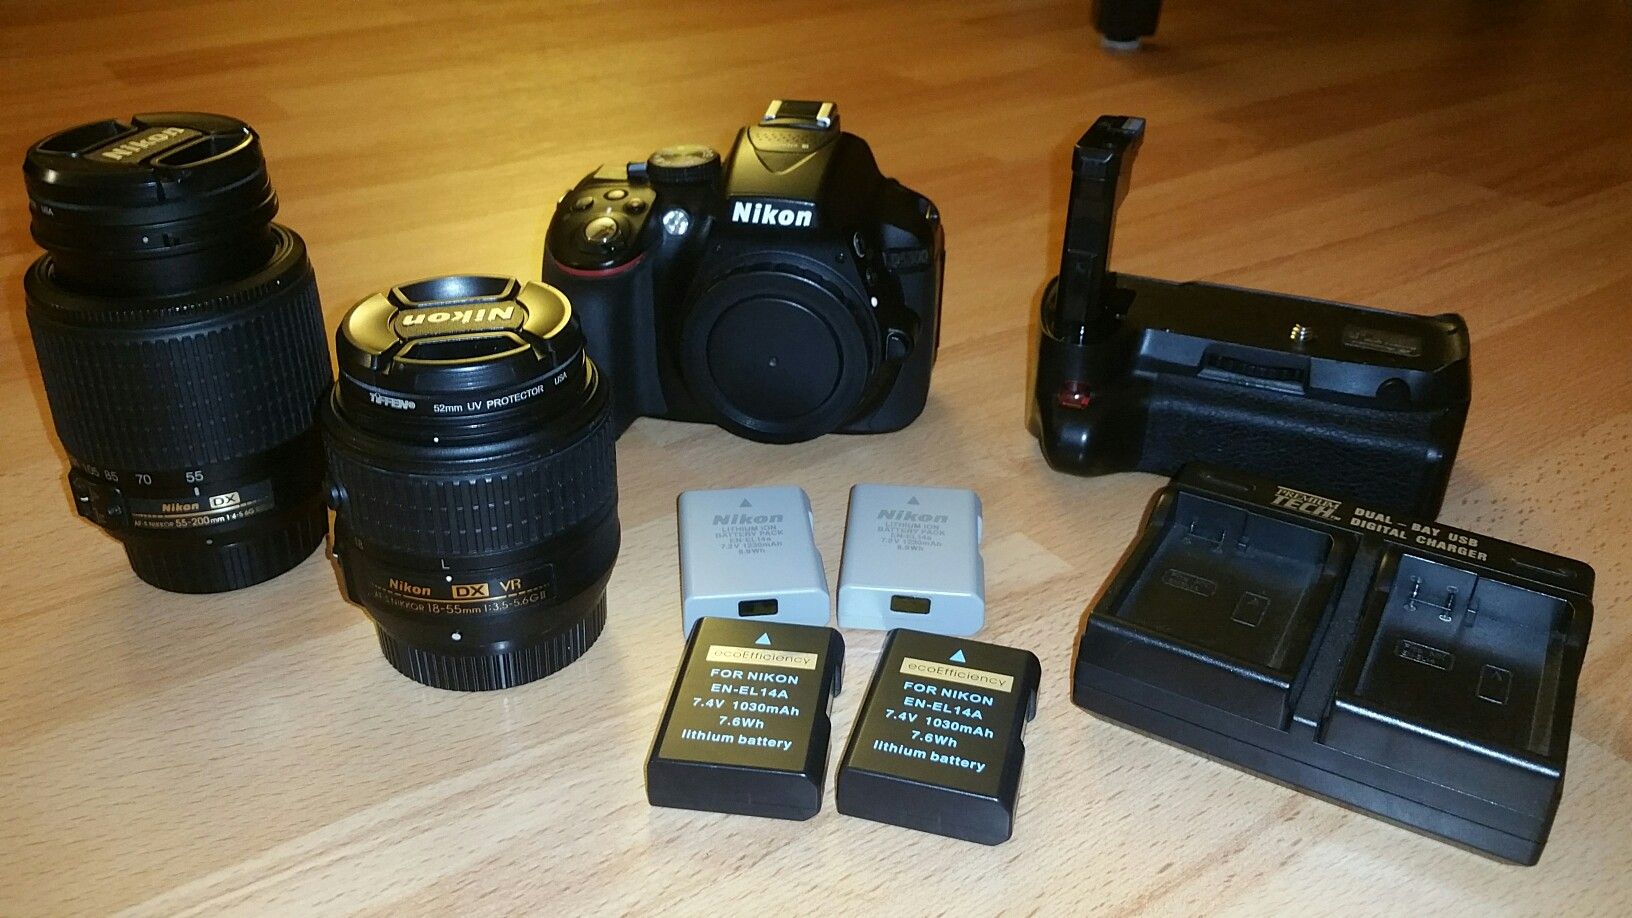 Nikon D5300 camera with 2 lenses, 4 batteries, 2 chargers, 1 battery grip, and 1 remote control!!